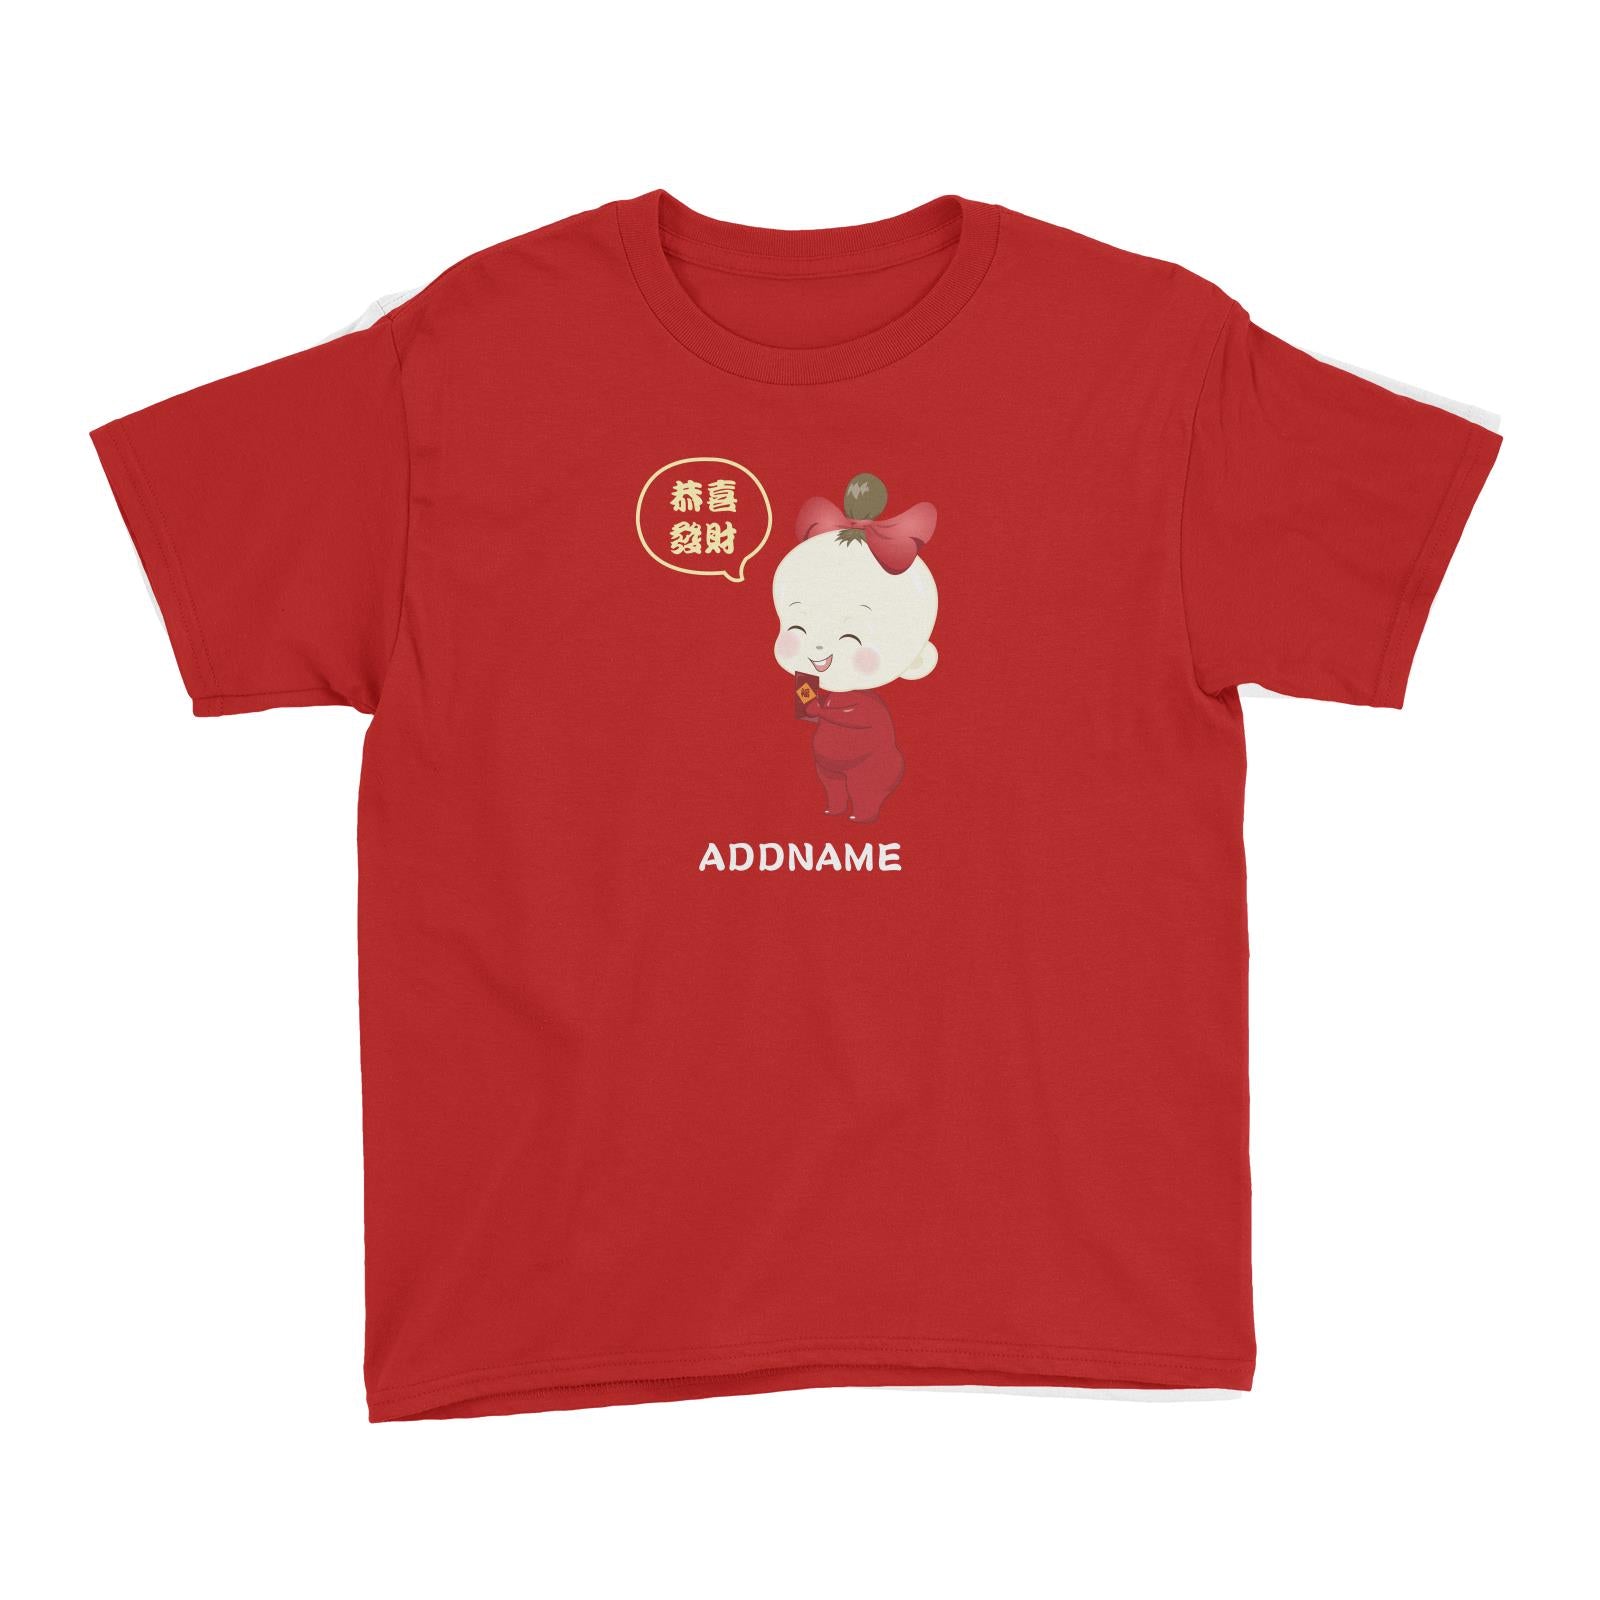 Chinese New Year Family Gong Xi Fai Cai Baby Girl Addname Kid's T-Shirt